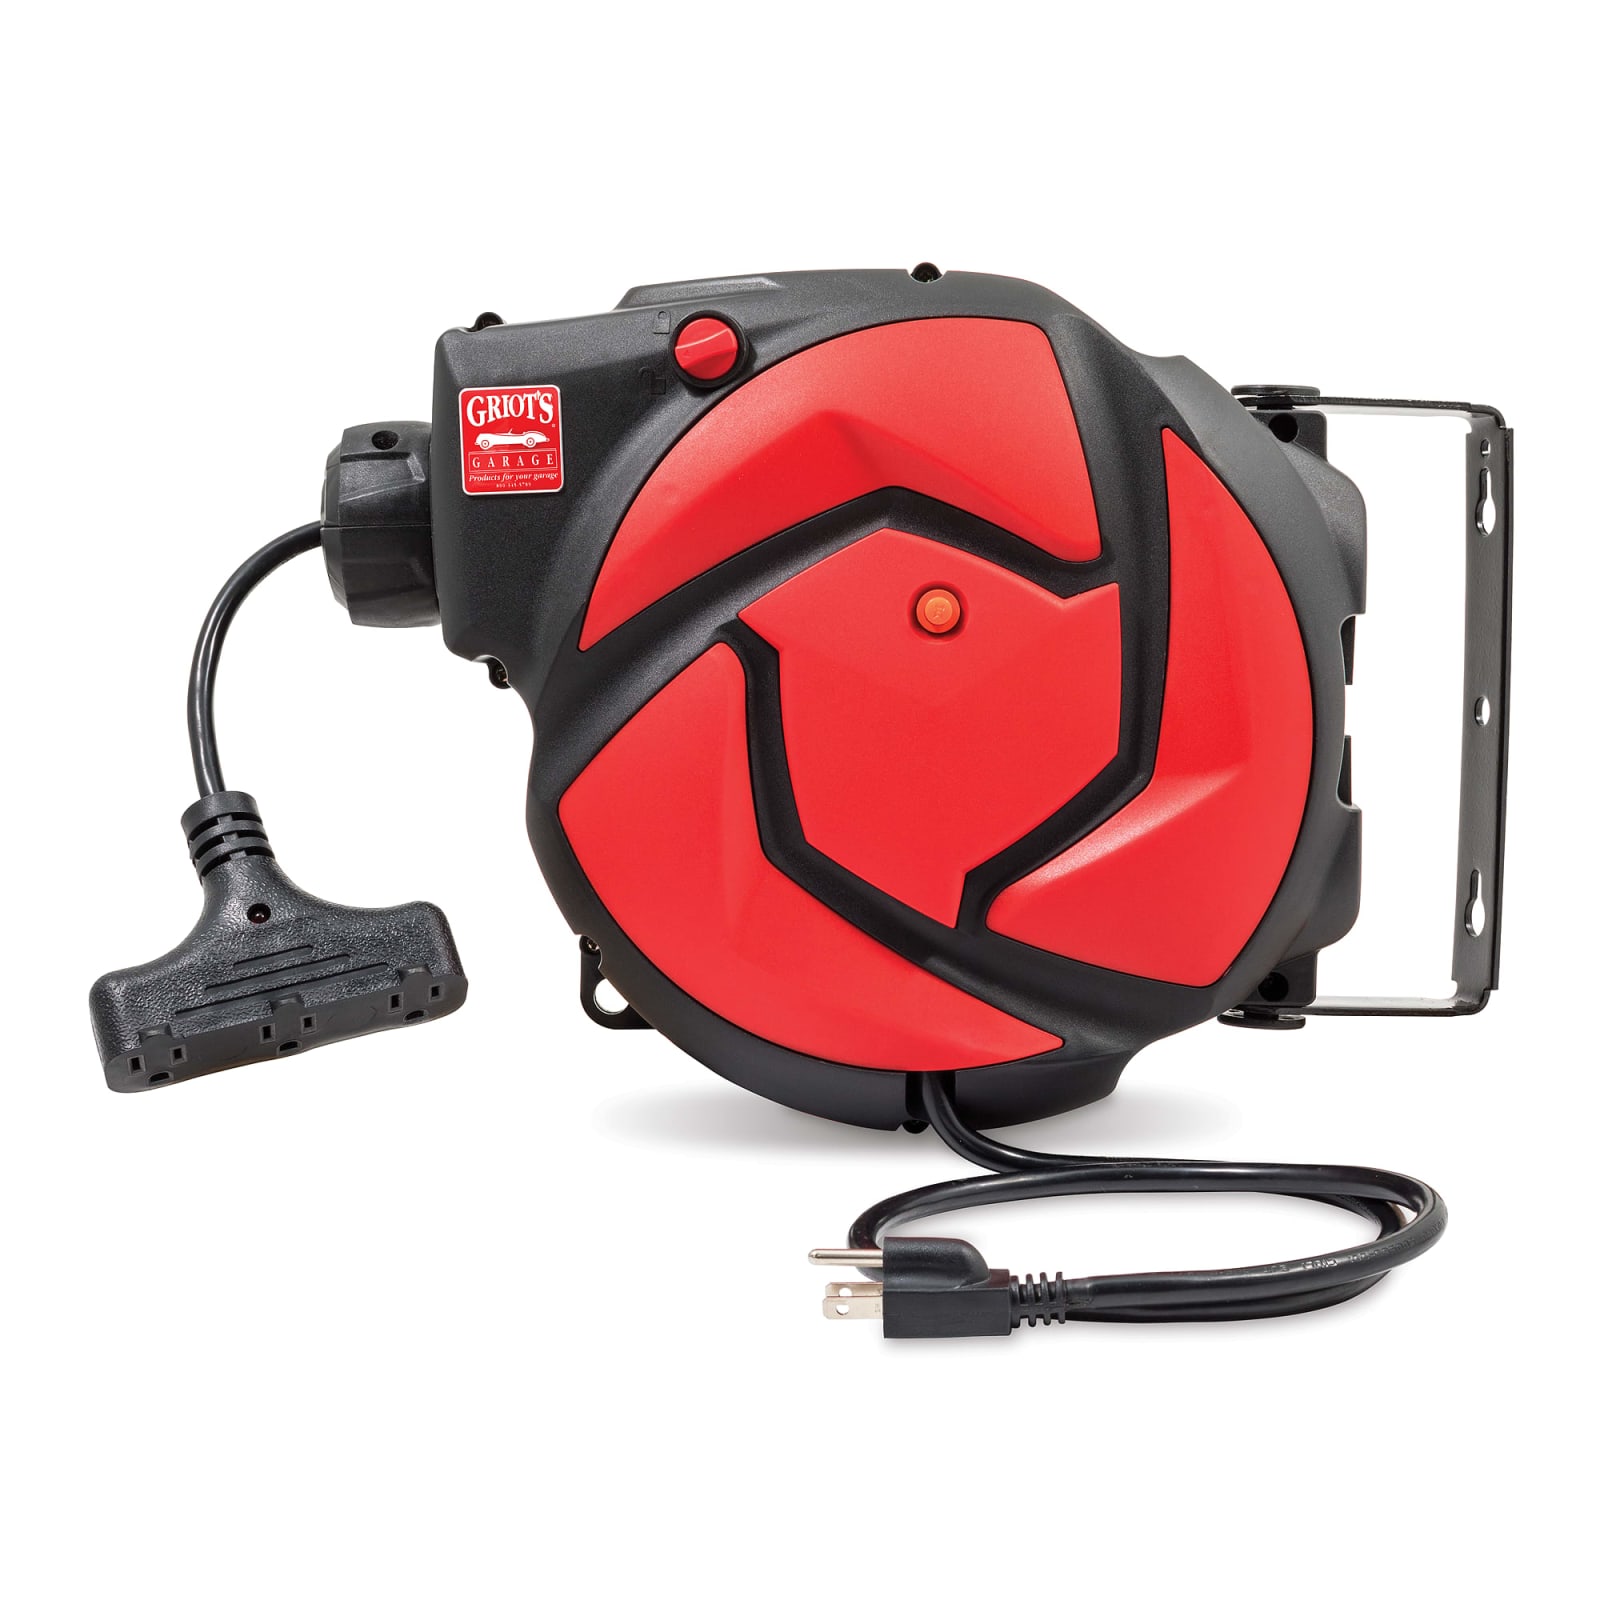 Eastwood Auto Rewind Electric Cord Reel